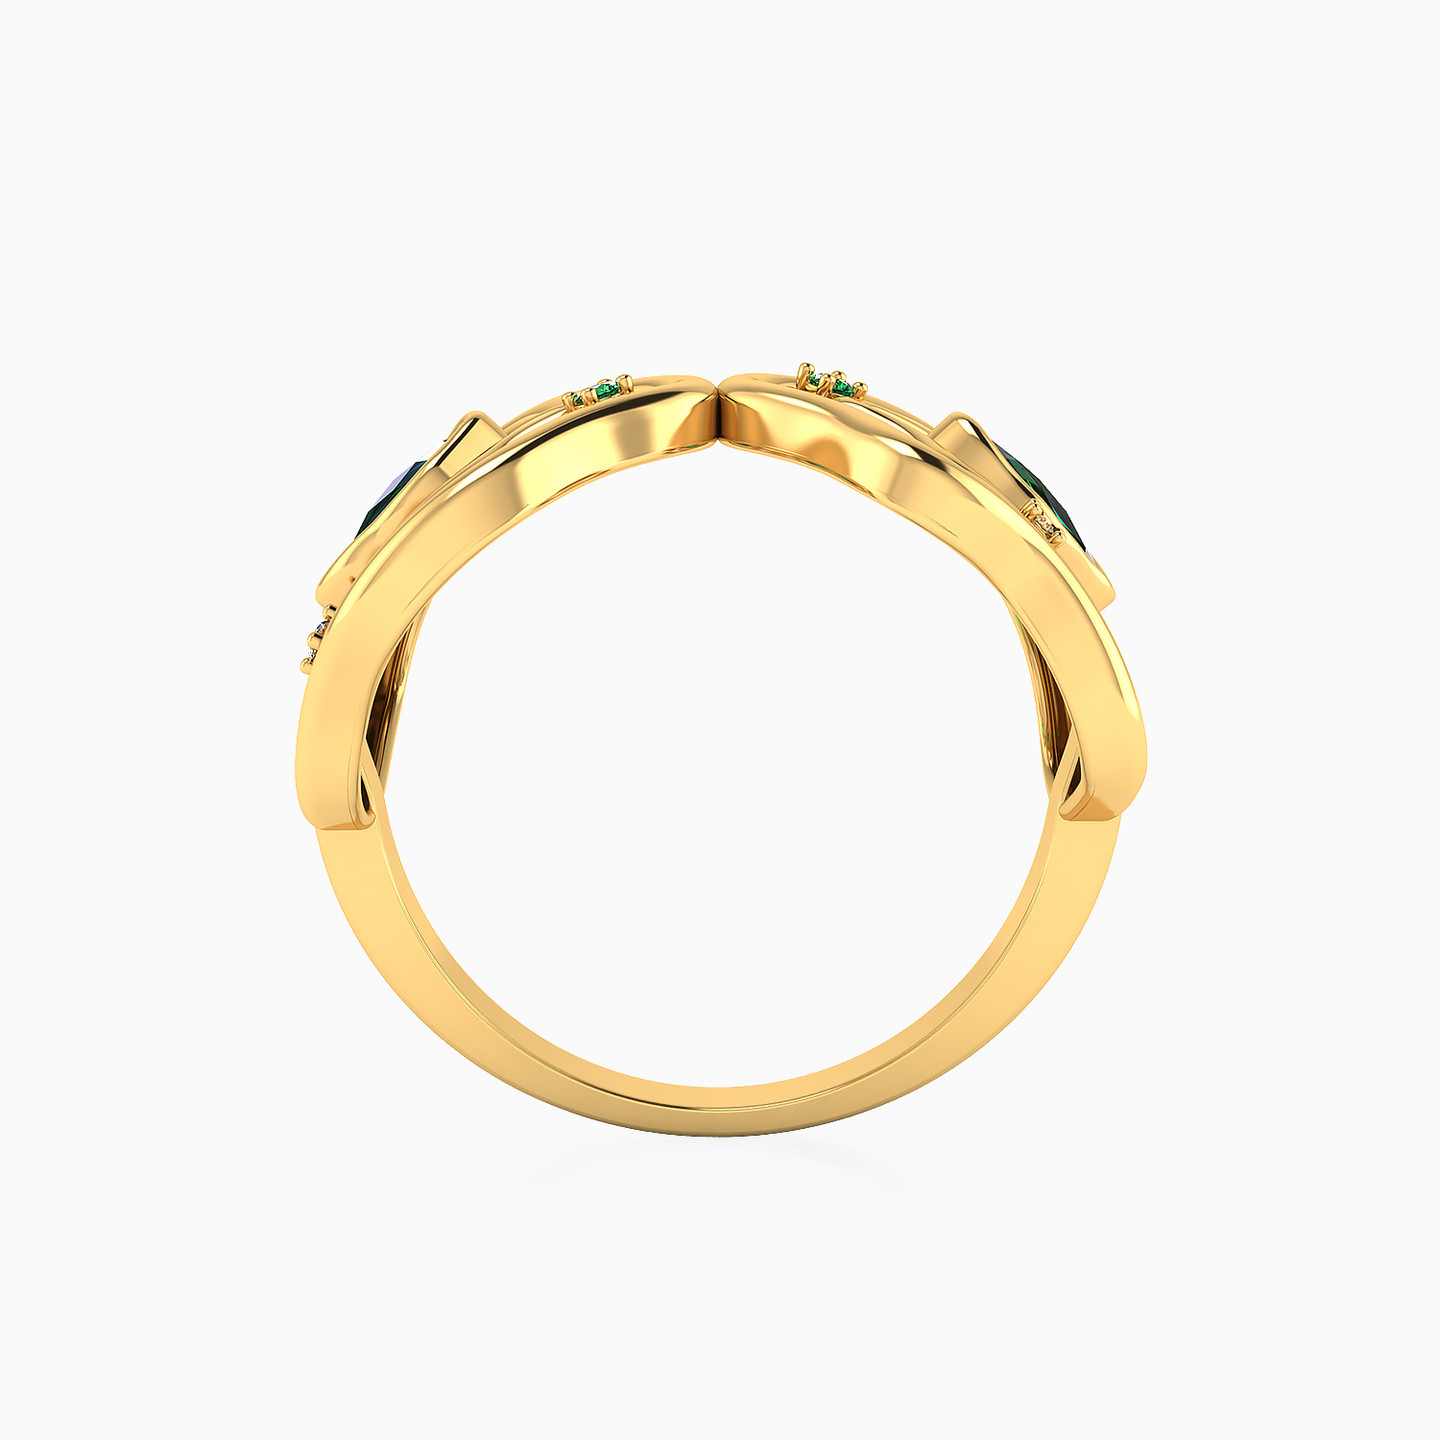 14K Gold Colored Stones Statement Ring - 3